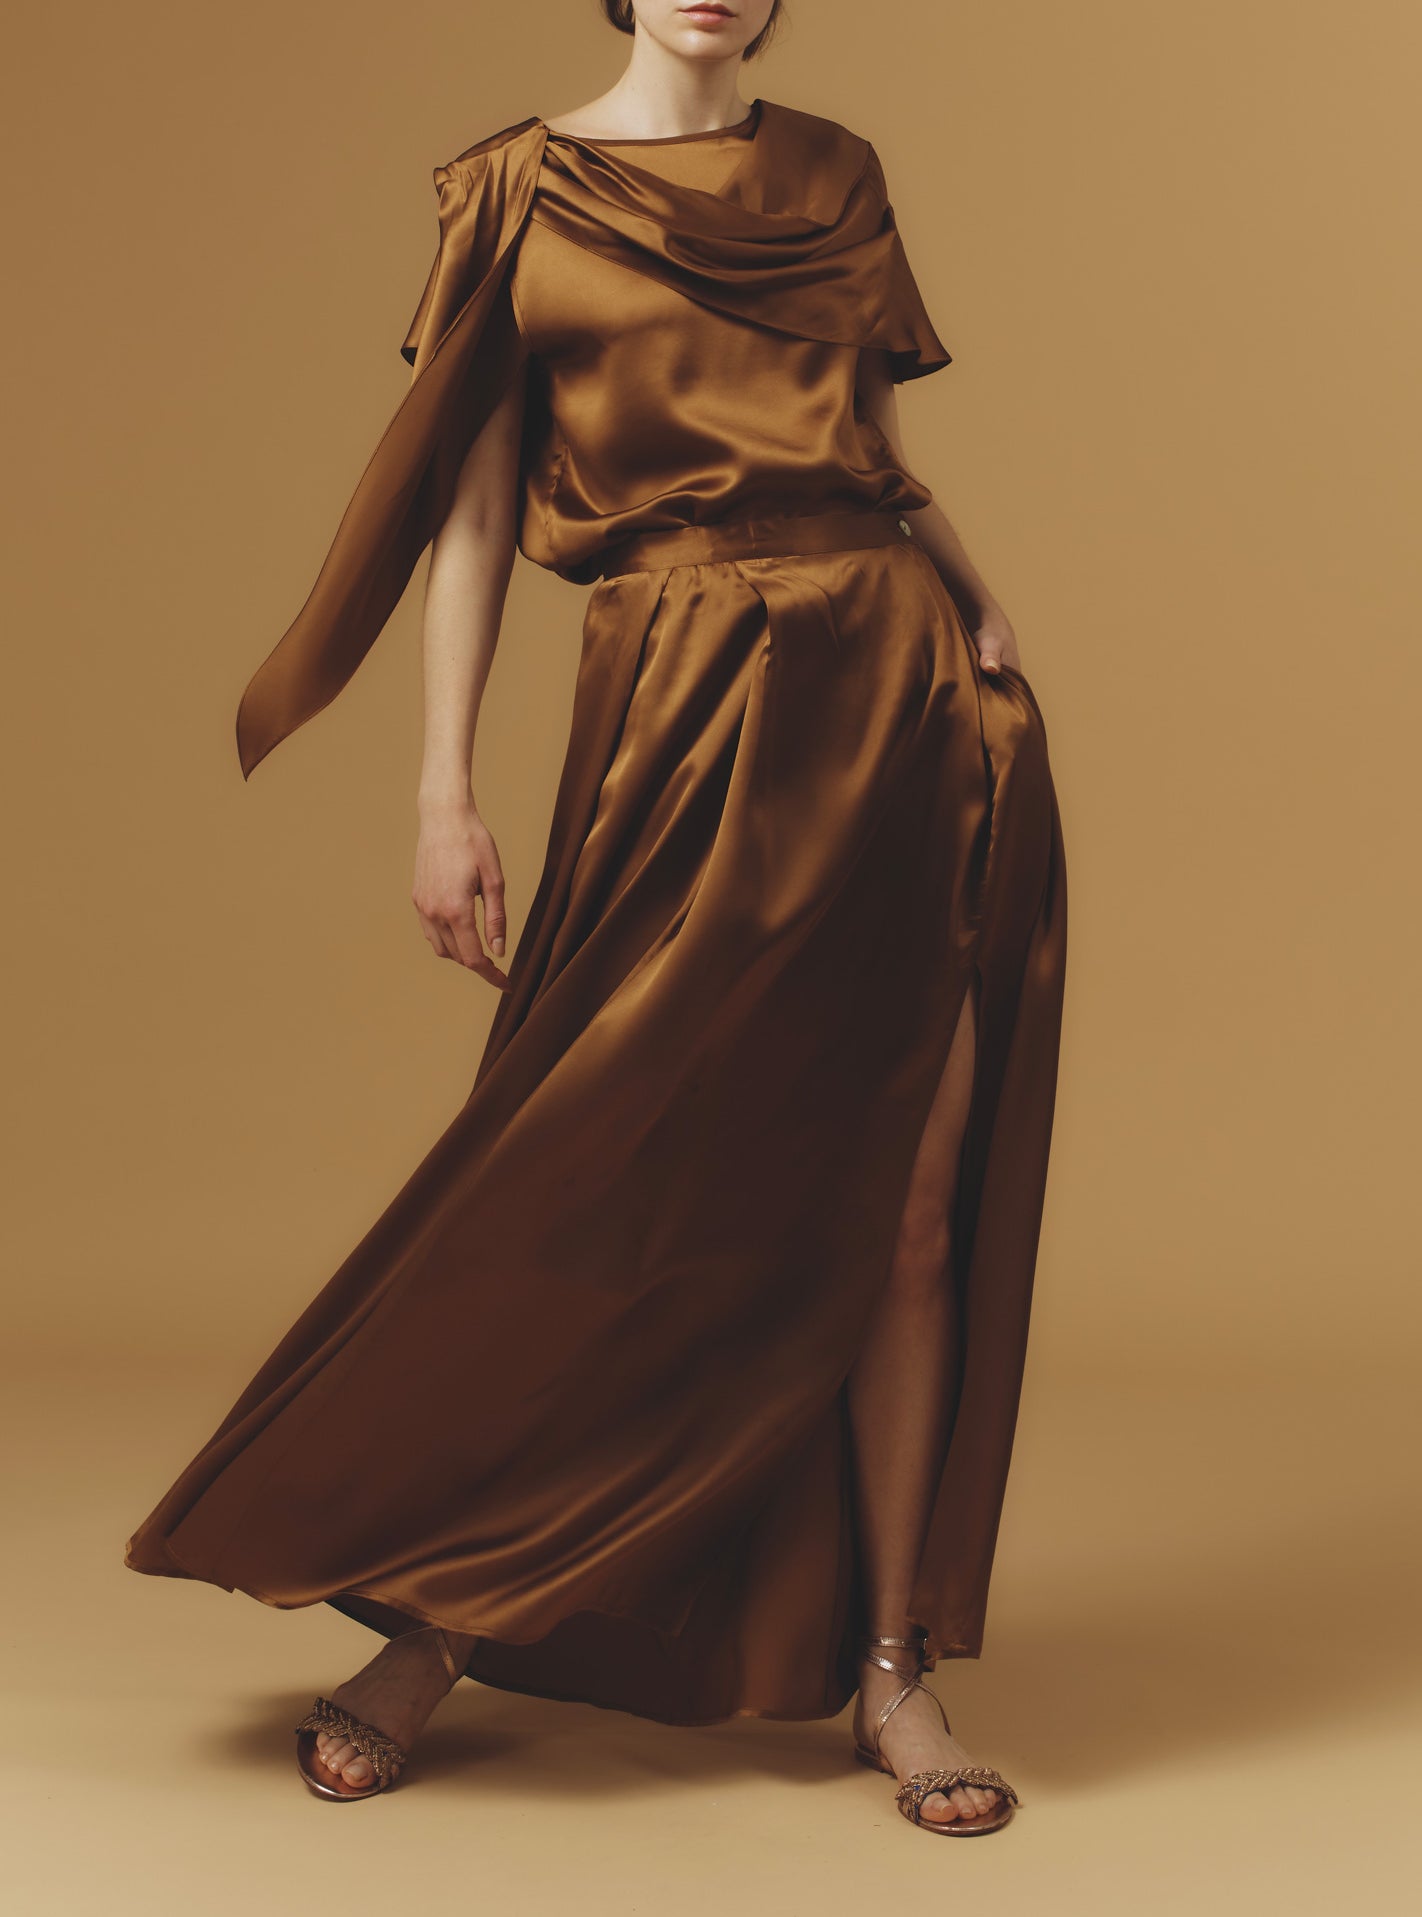 Large view of Silvana Silk Copper Skirt long with Zizi top by Thierry Colson